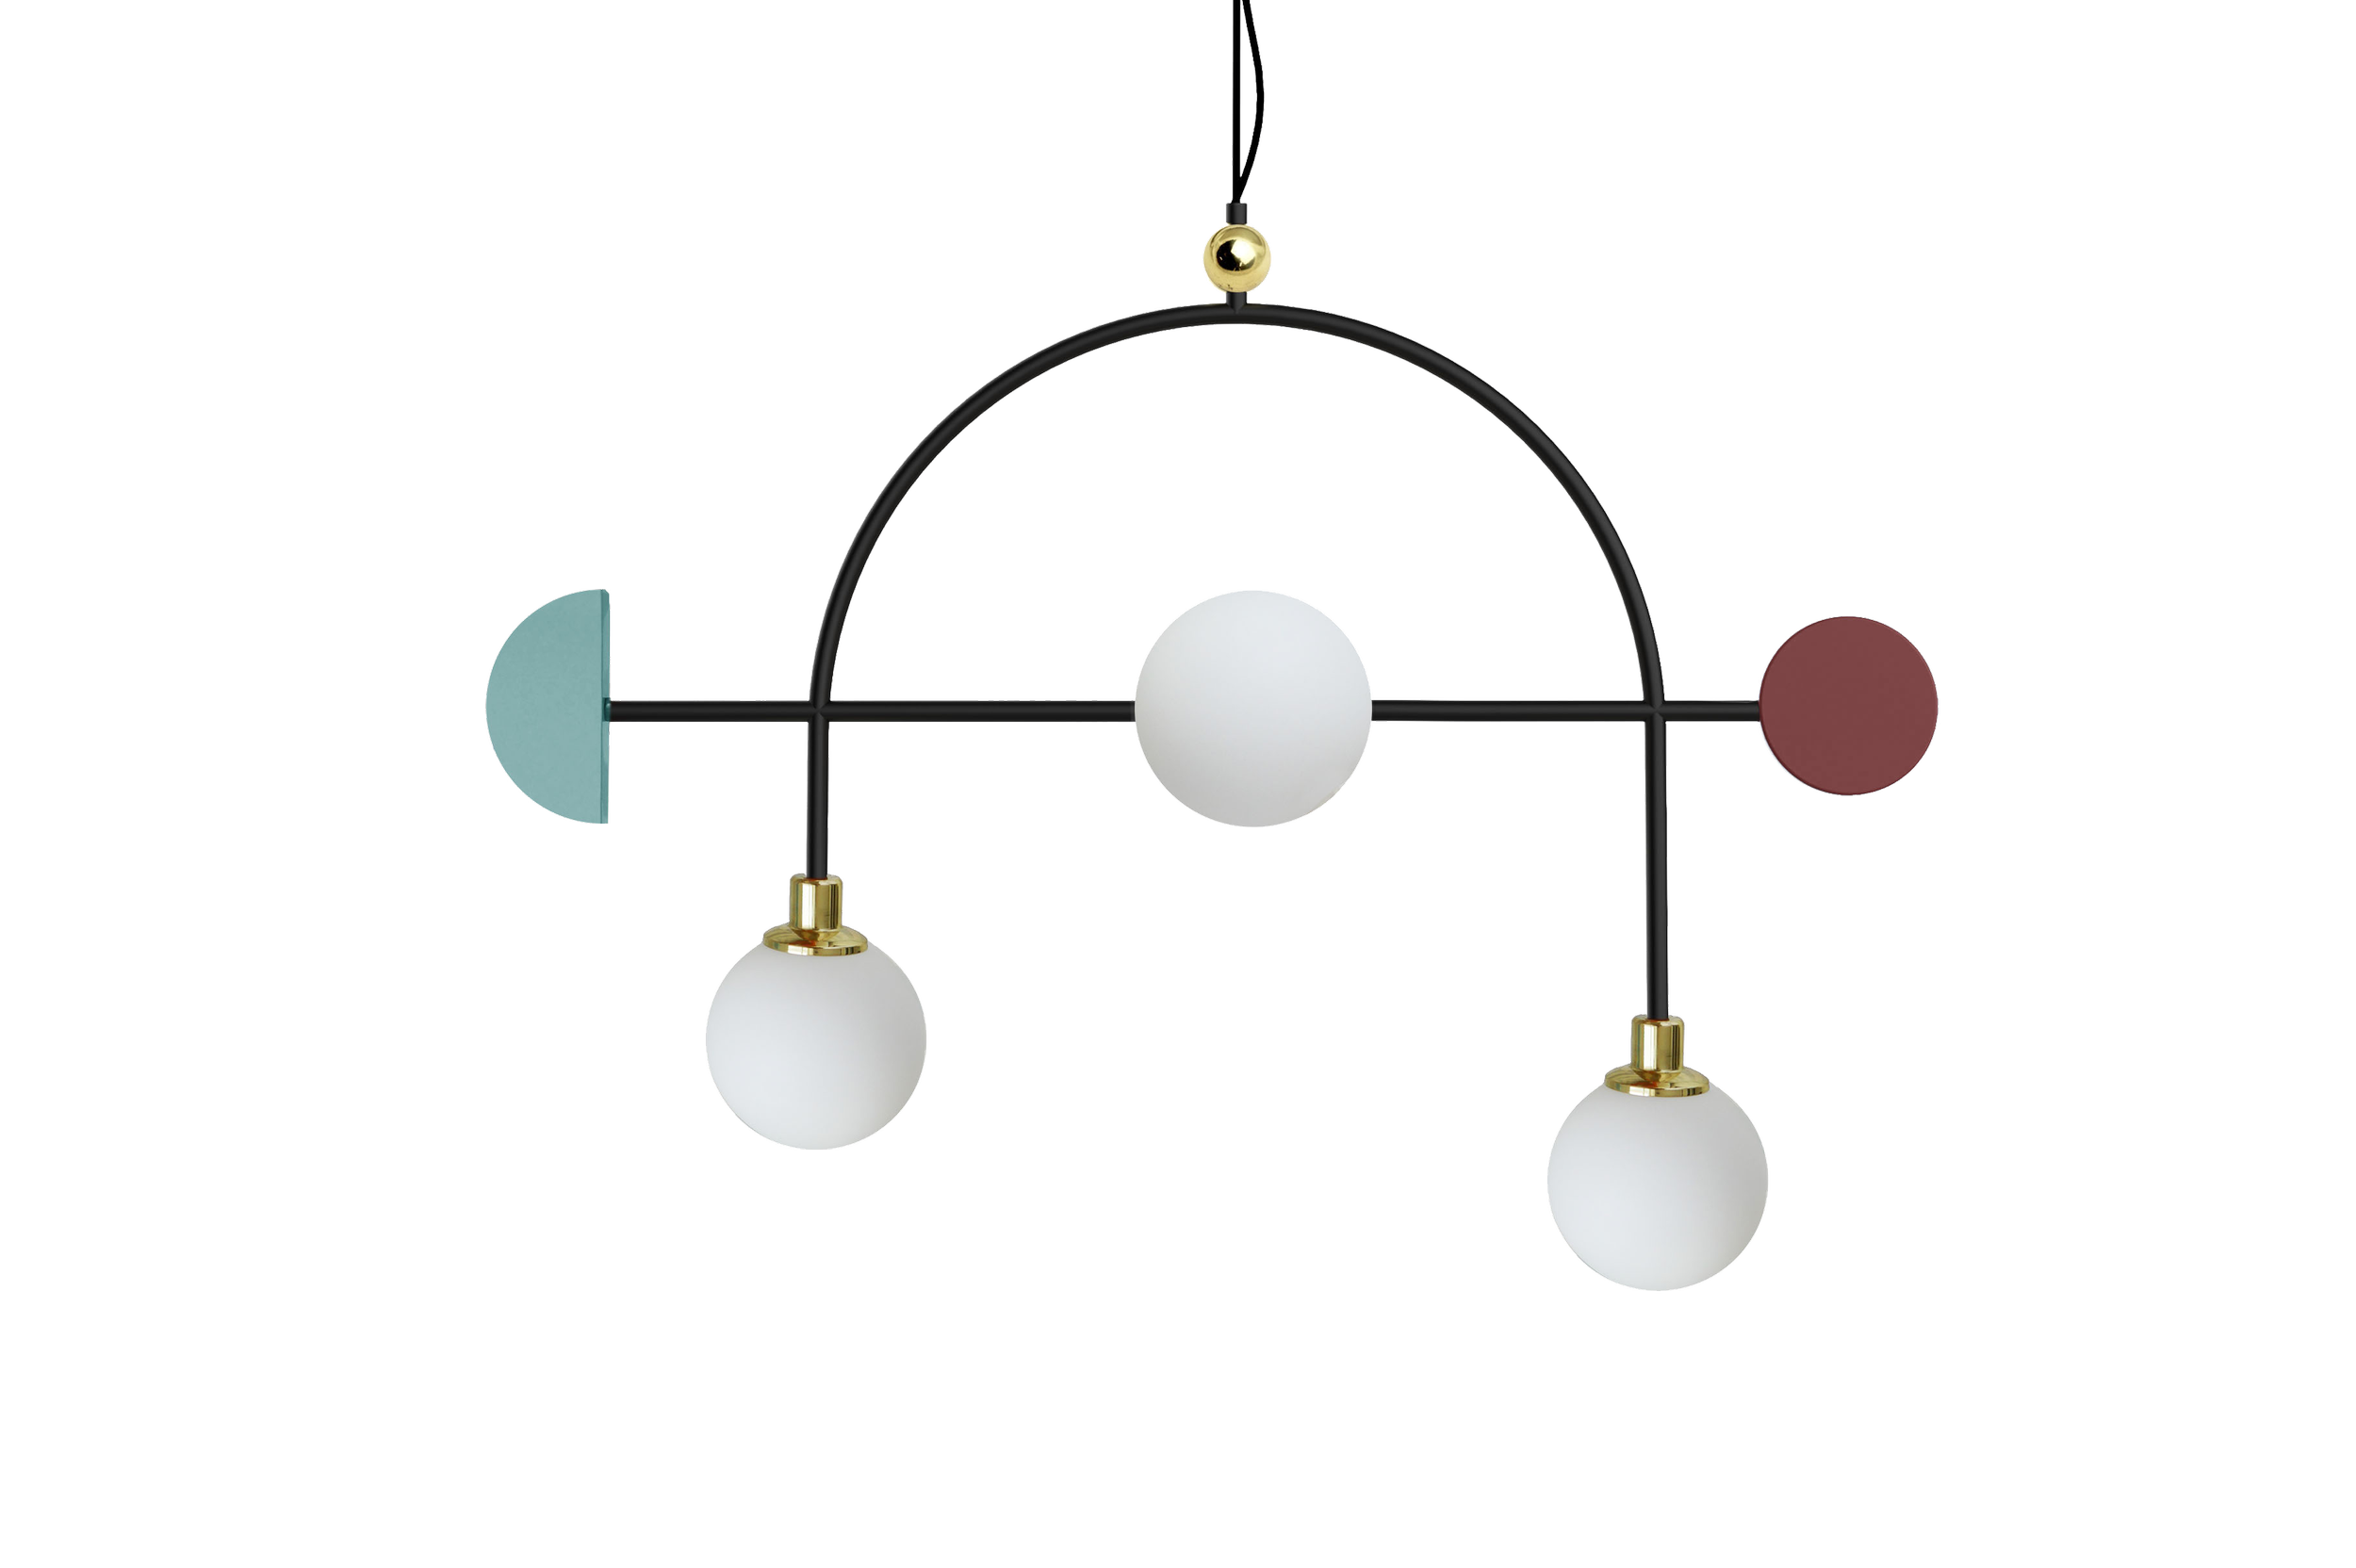 Space ceiling lamp dovain studio by Sergio Prieto.png